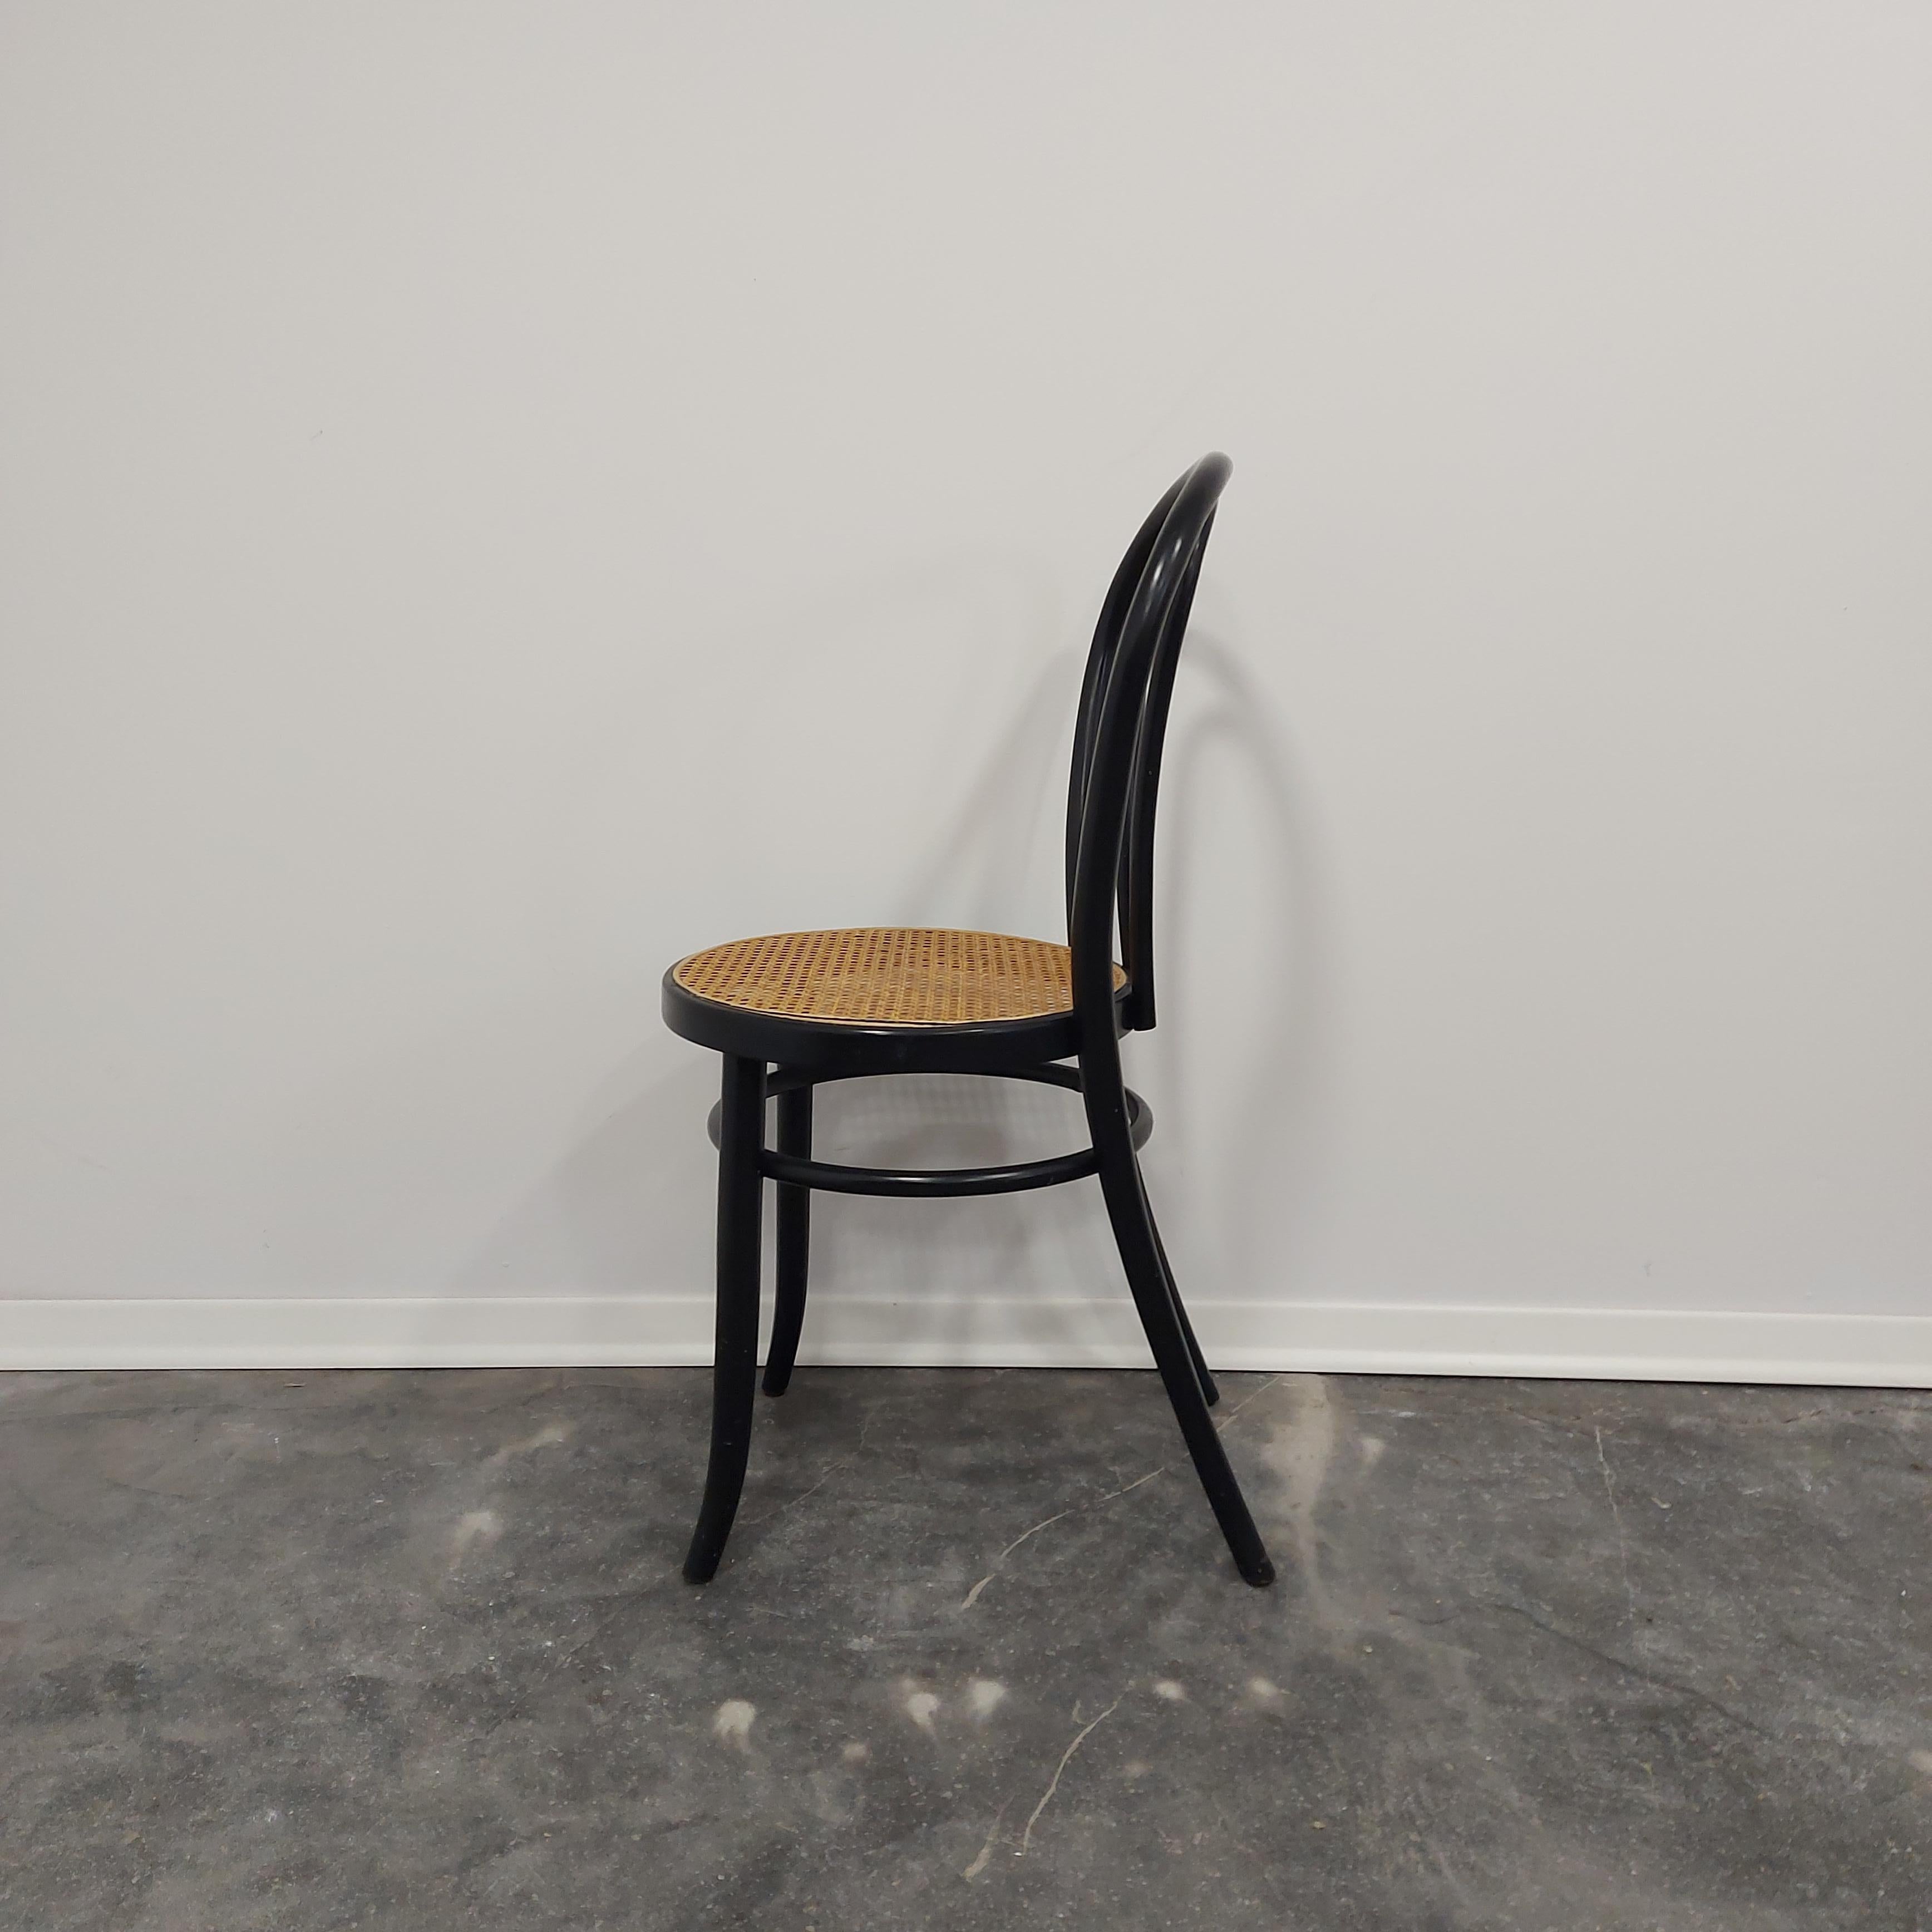 Late 20th Century Chair by Thonet, No. 18 